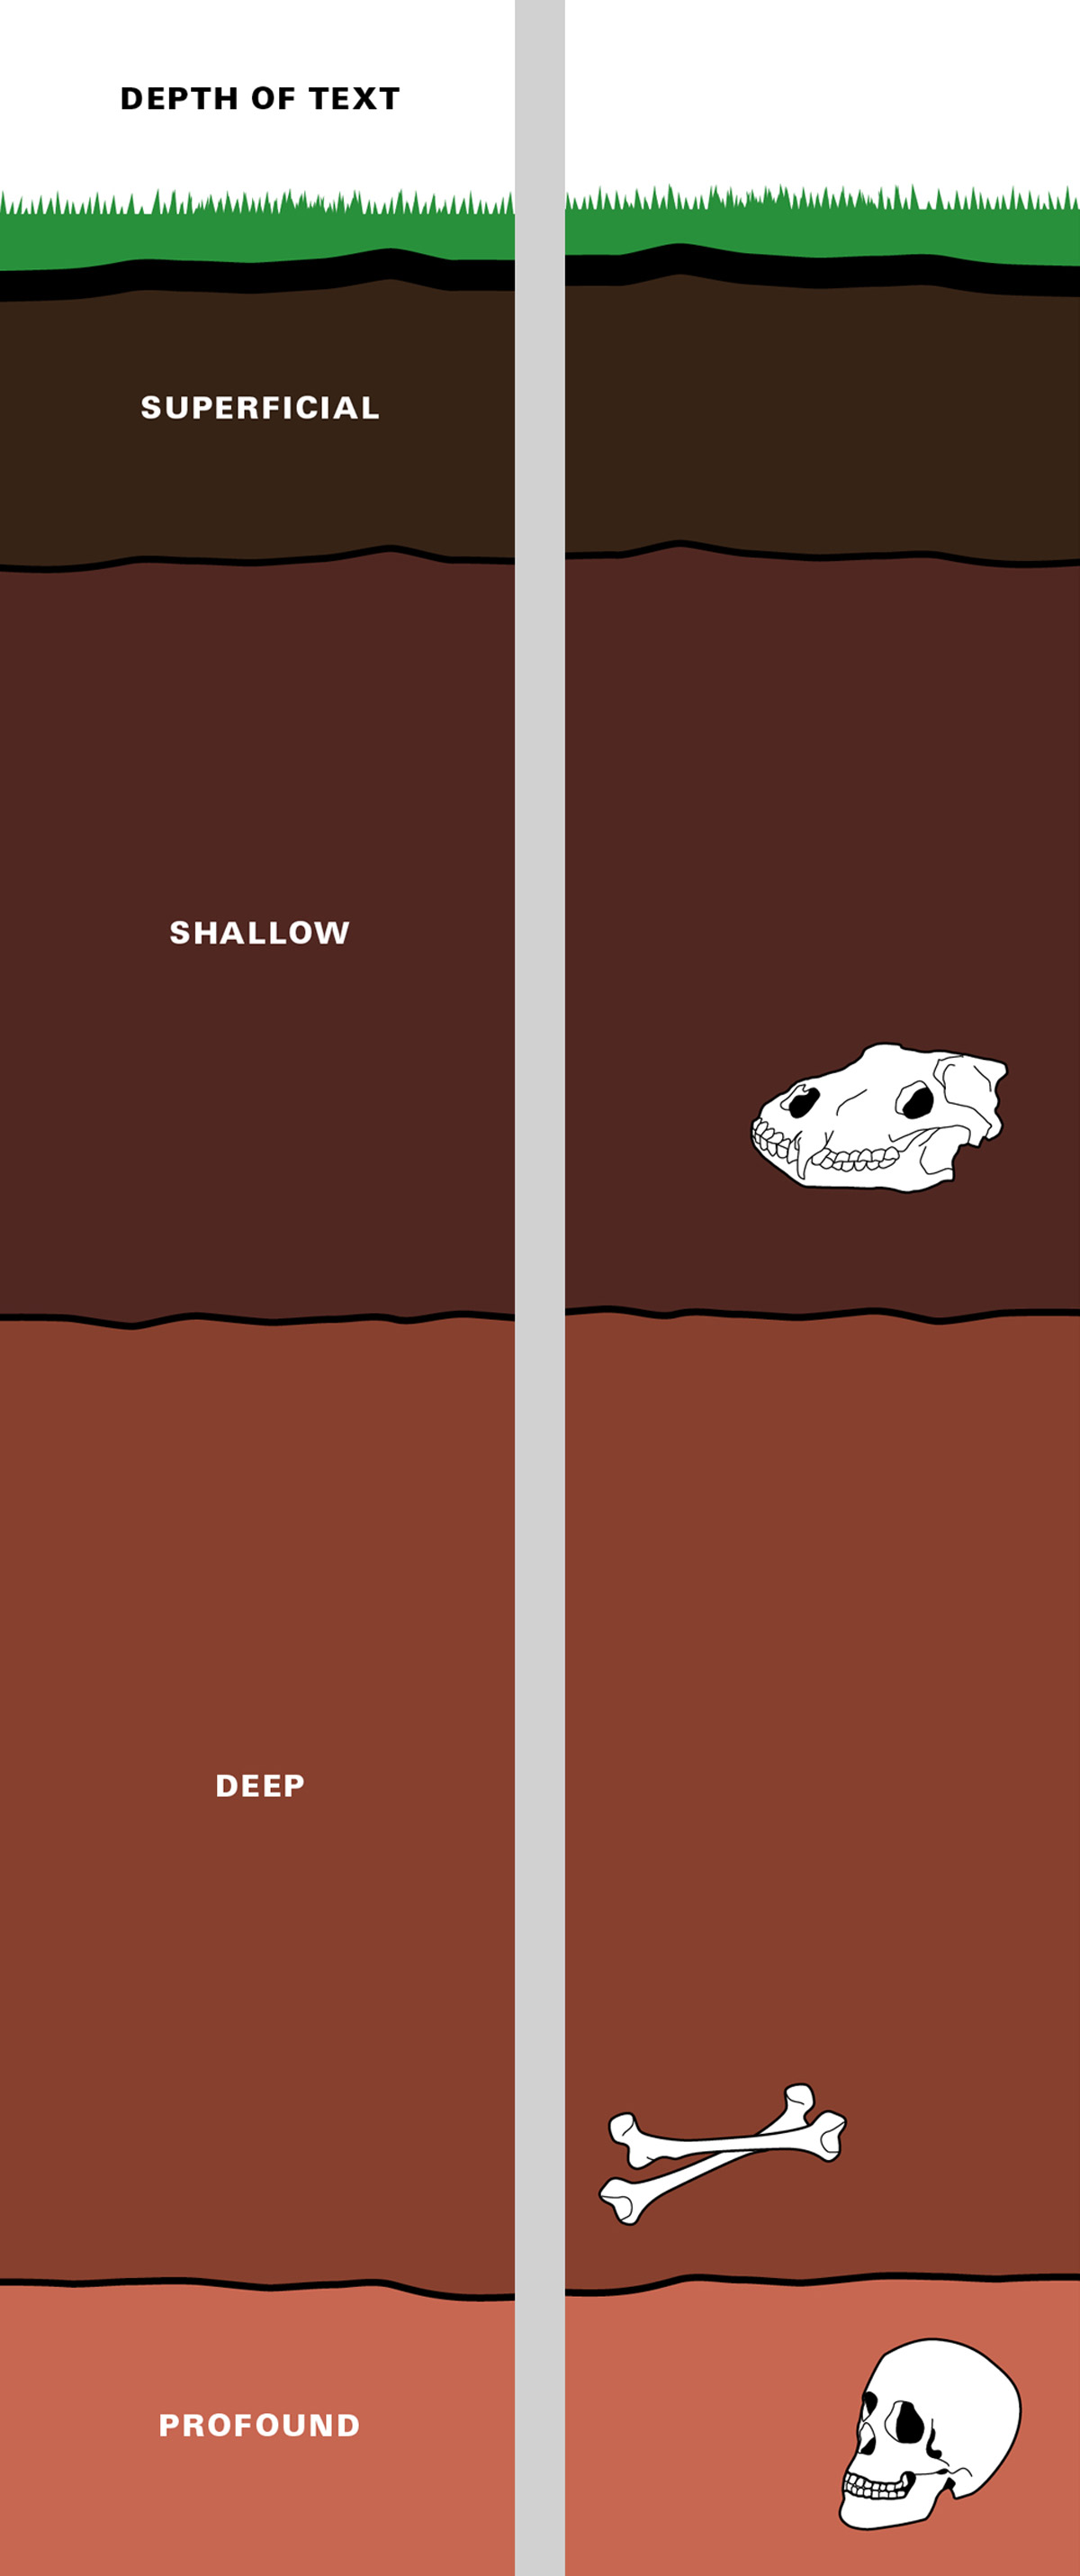 A bookmark depicting a cartoon cross-section of soil titled “depth of text”, with the different strata labeled as “profound, deep, shallow, superficial.”